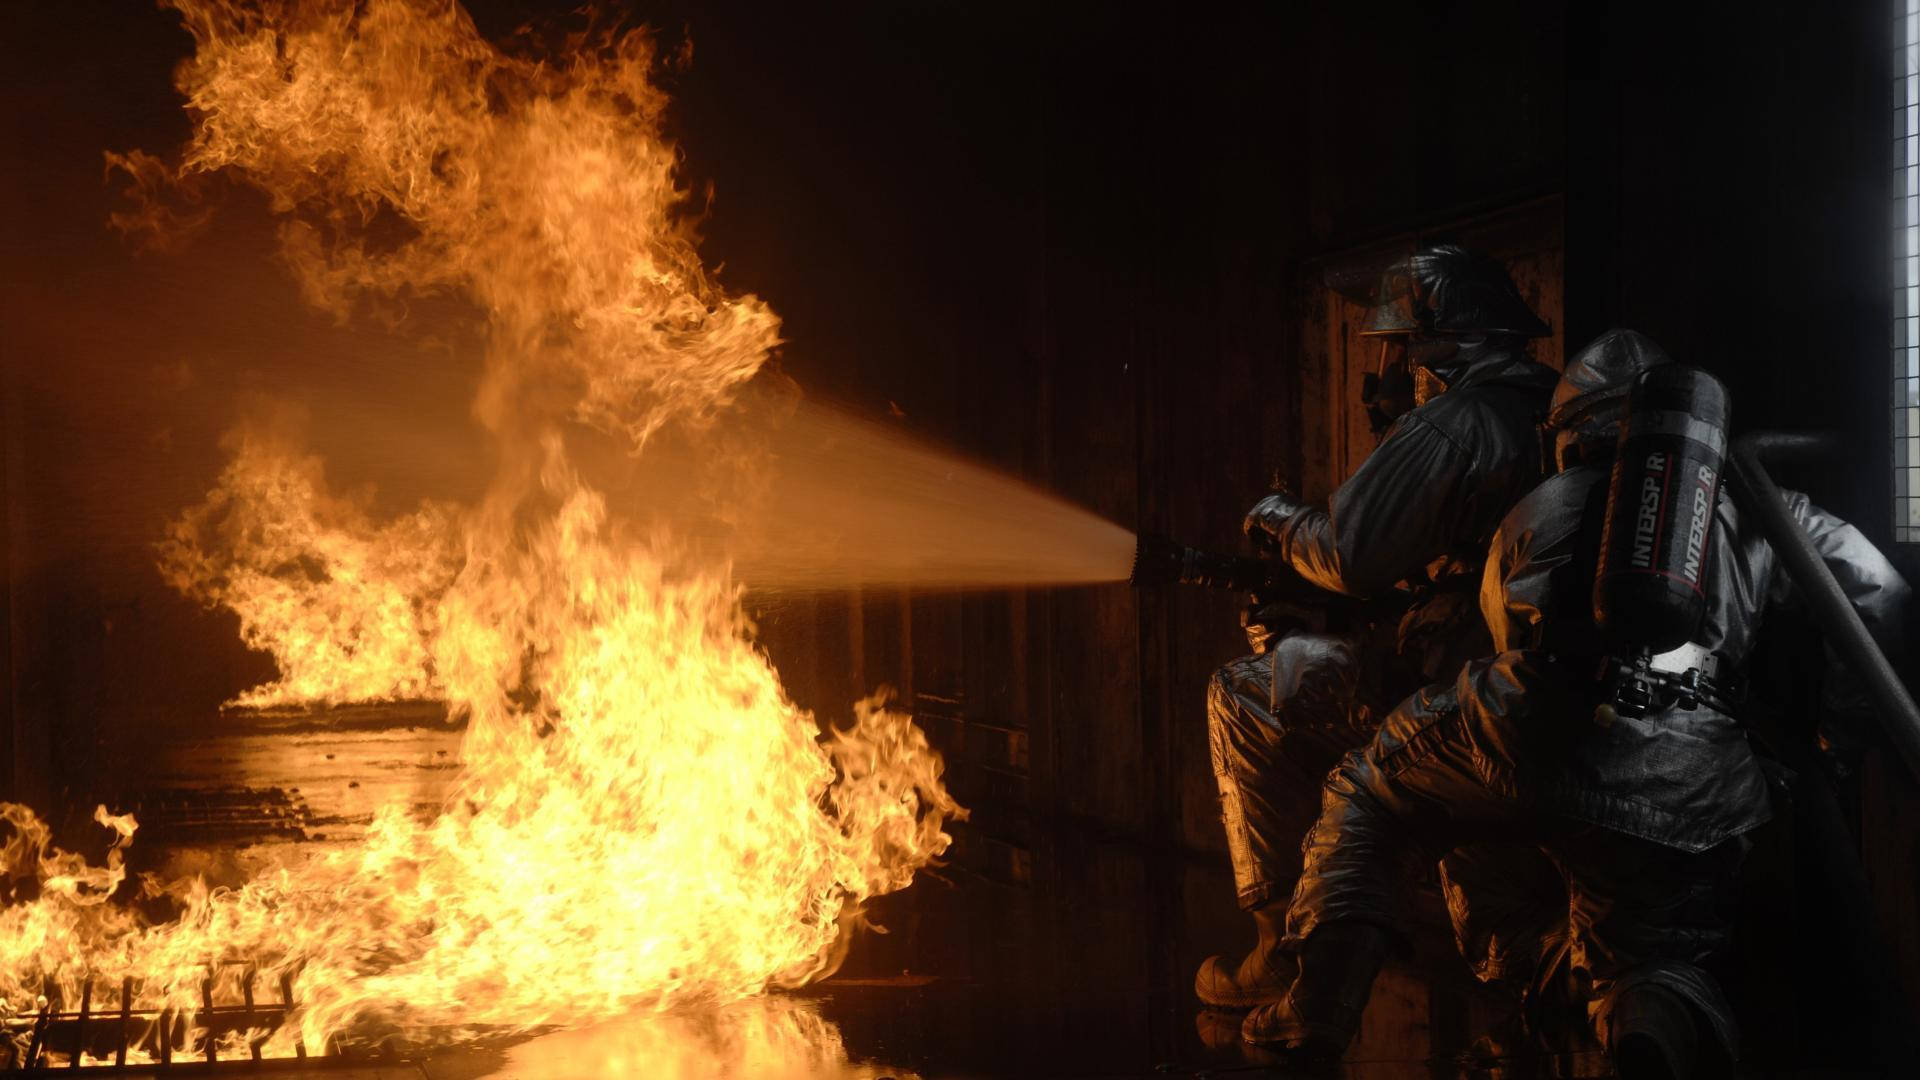 Braving The Flames: Firefighter In Action